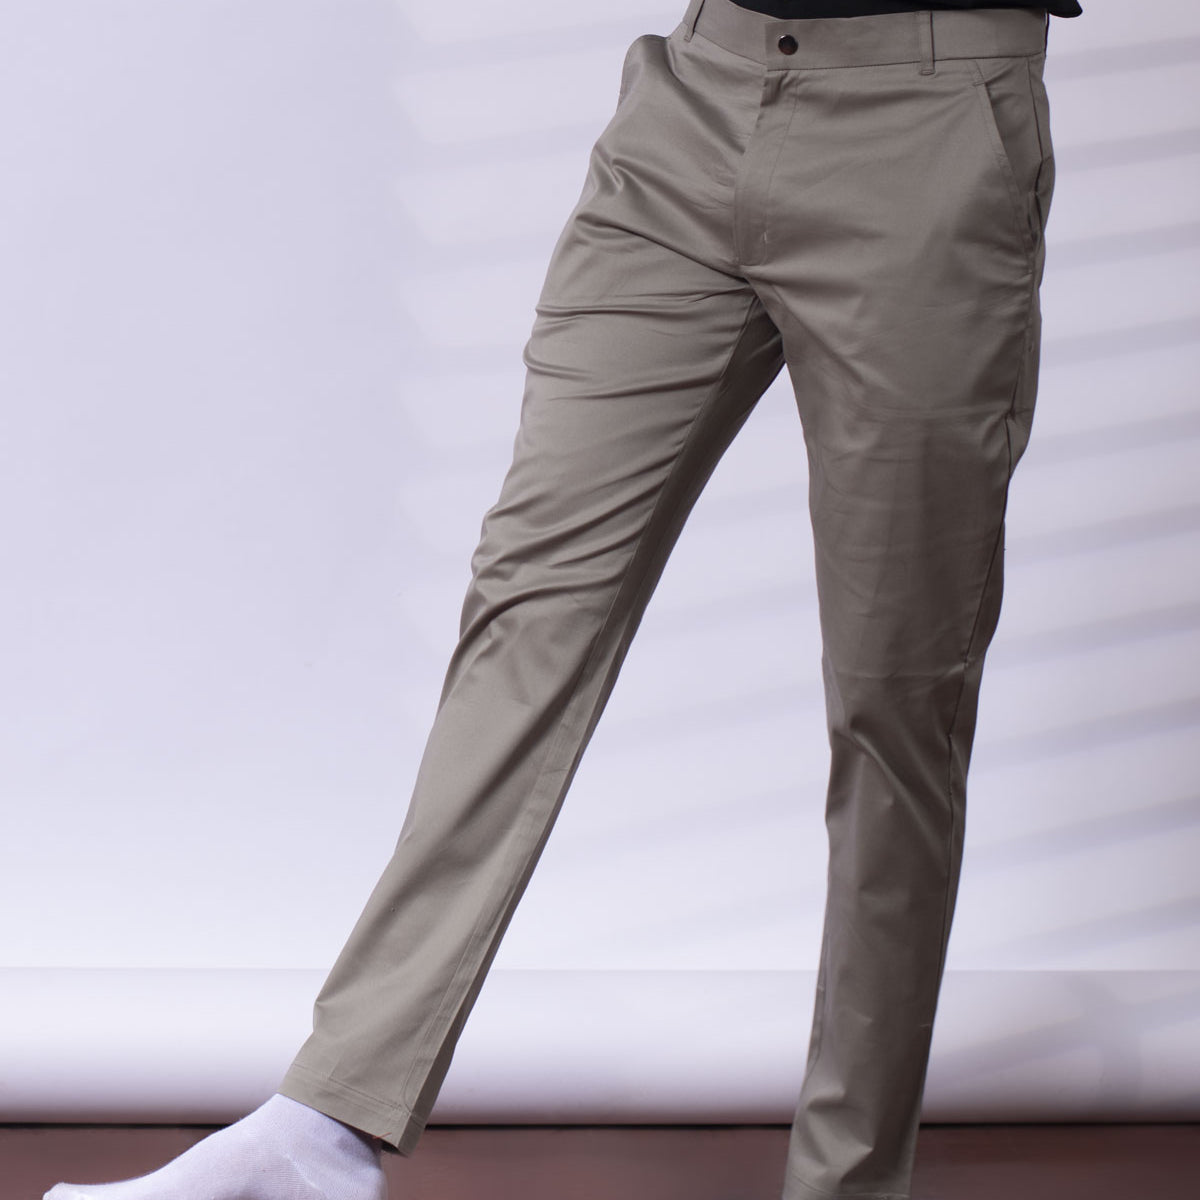 Buy Air Oyster Beige Trouser